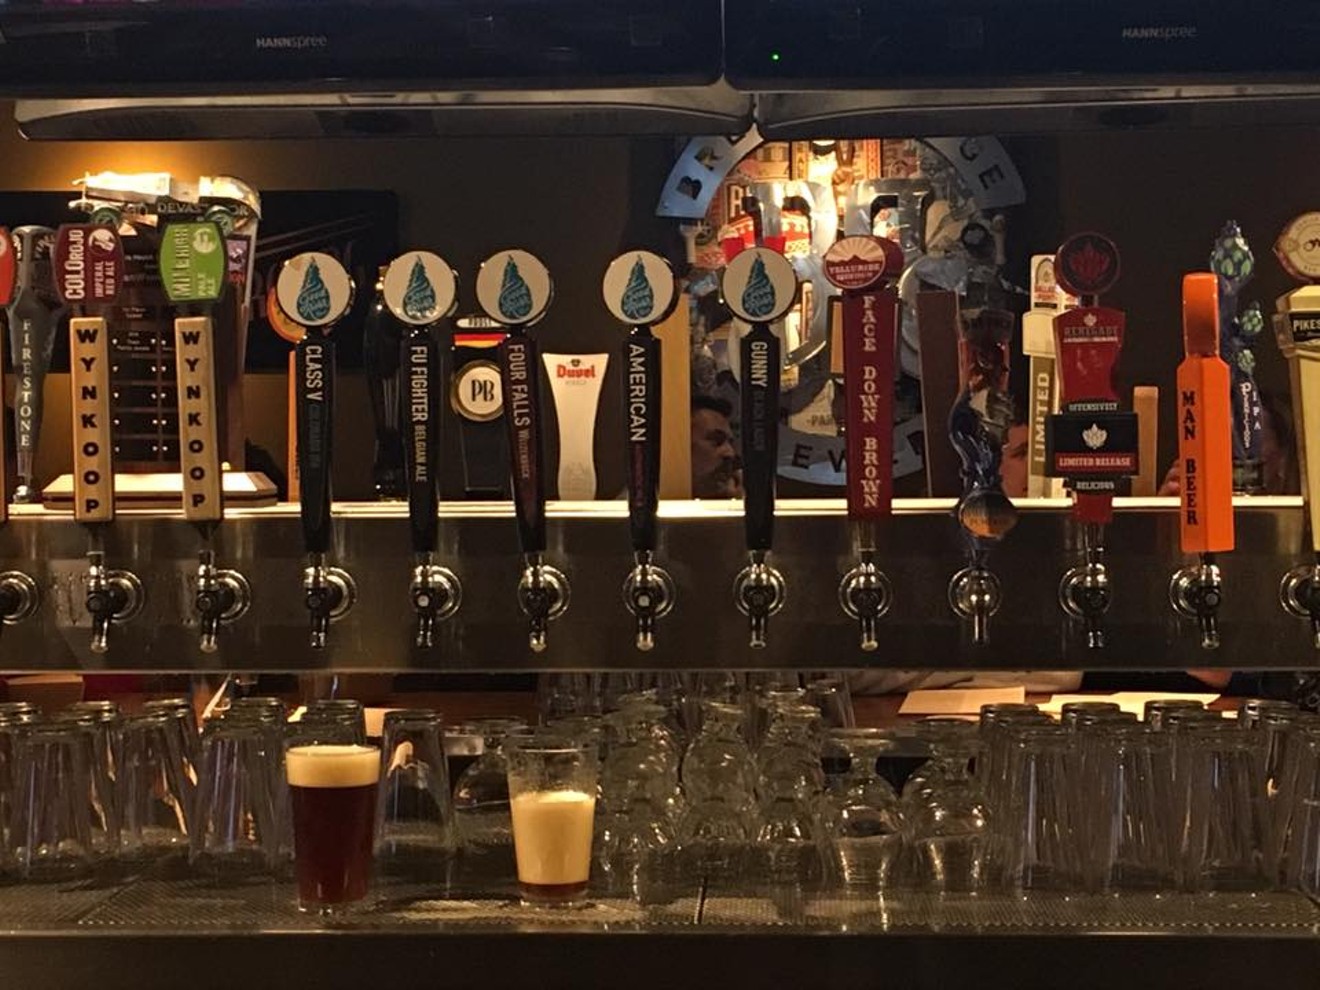 Good River beers were recently on tap at Ale House at Amato's.